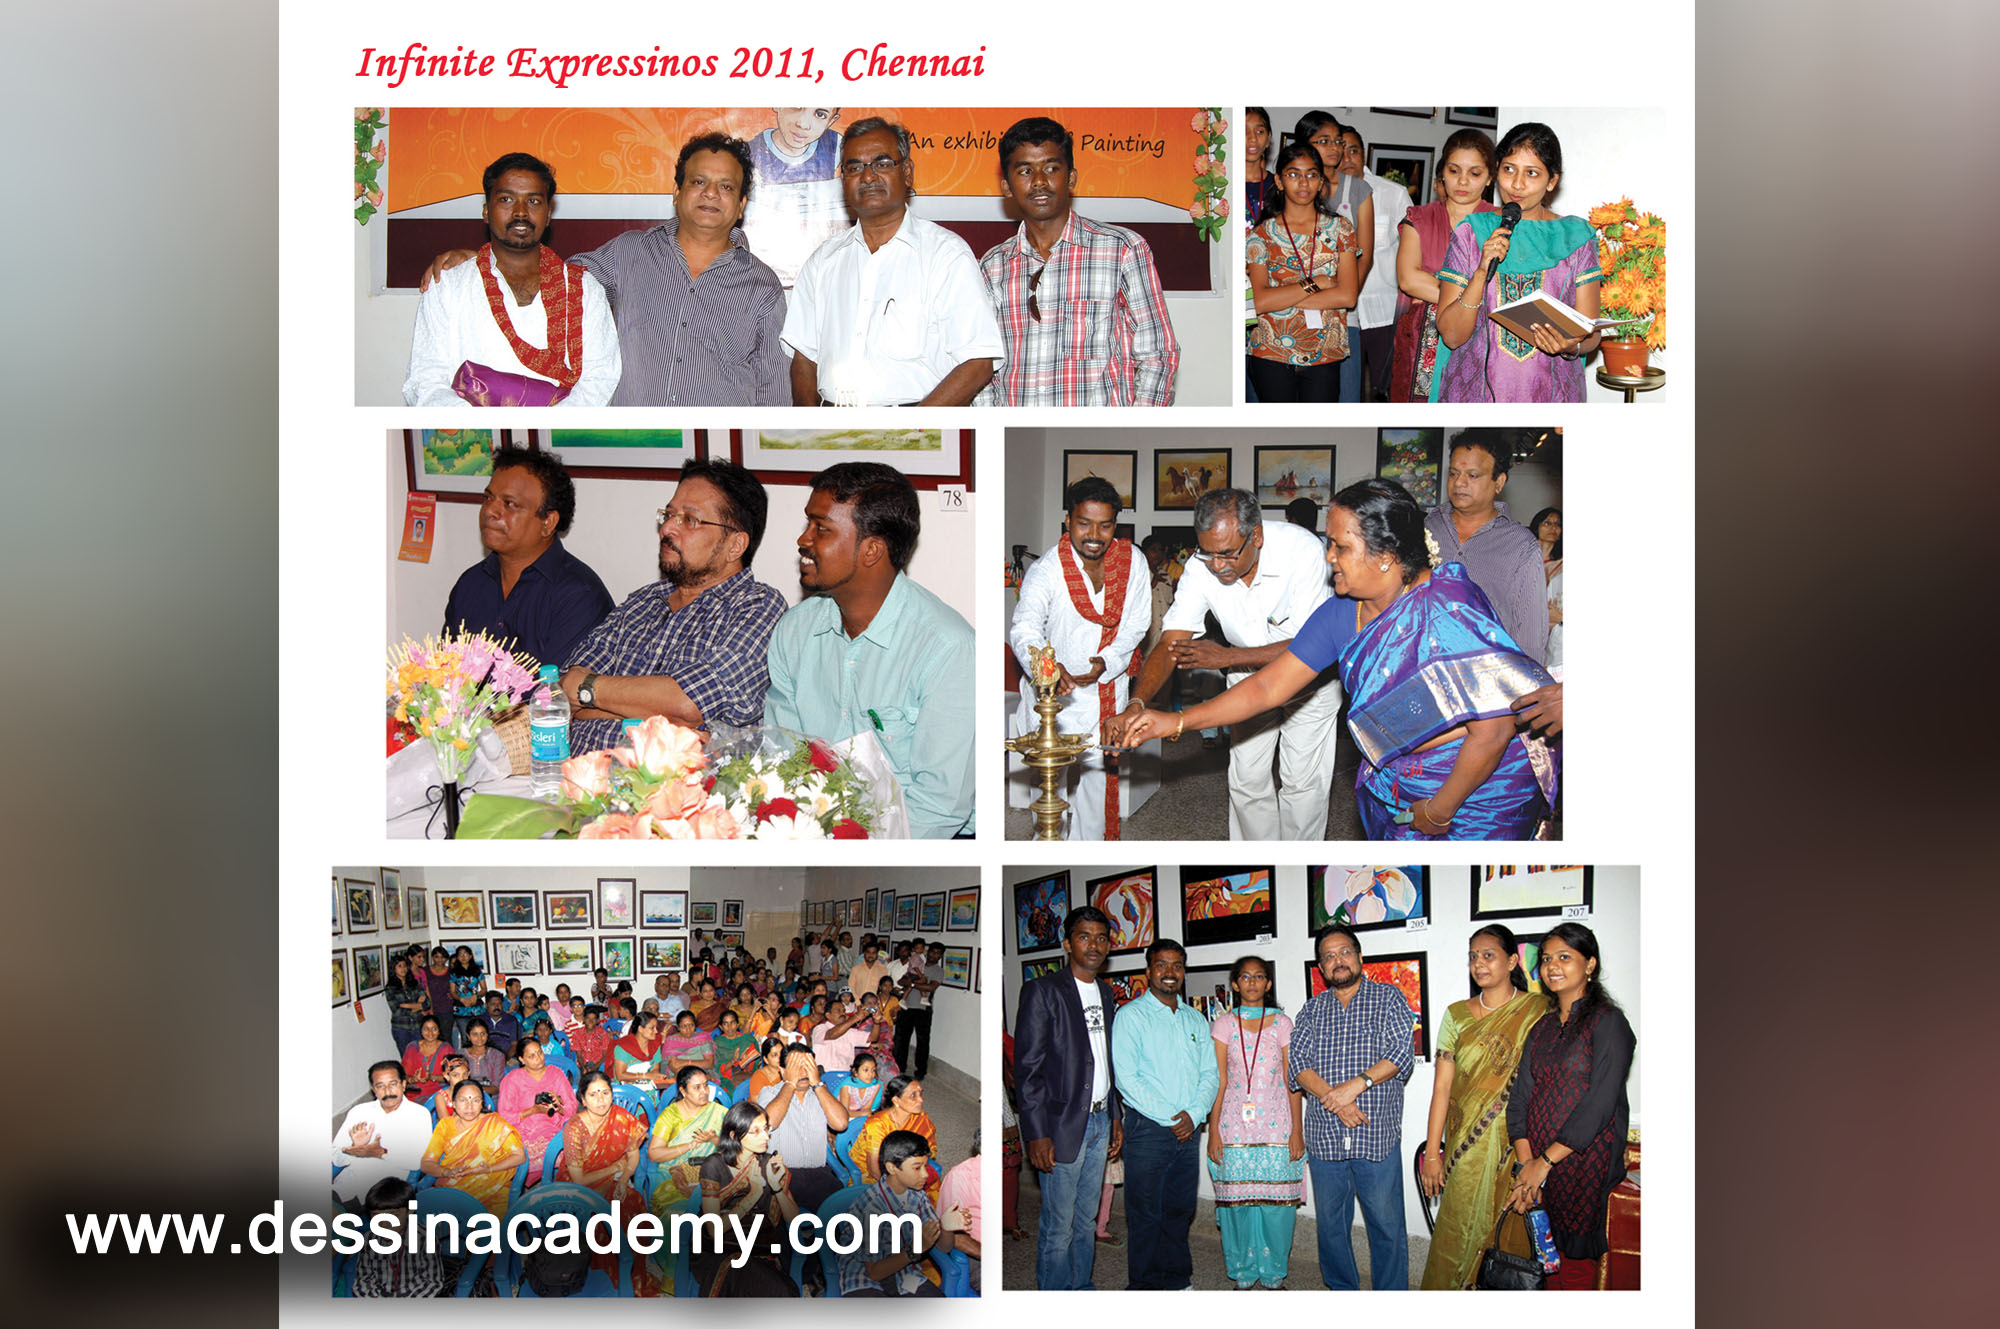 Dessin School of Arts Event Gallery 5, Drawing classes in ChennaiDessin School of Arts